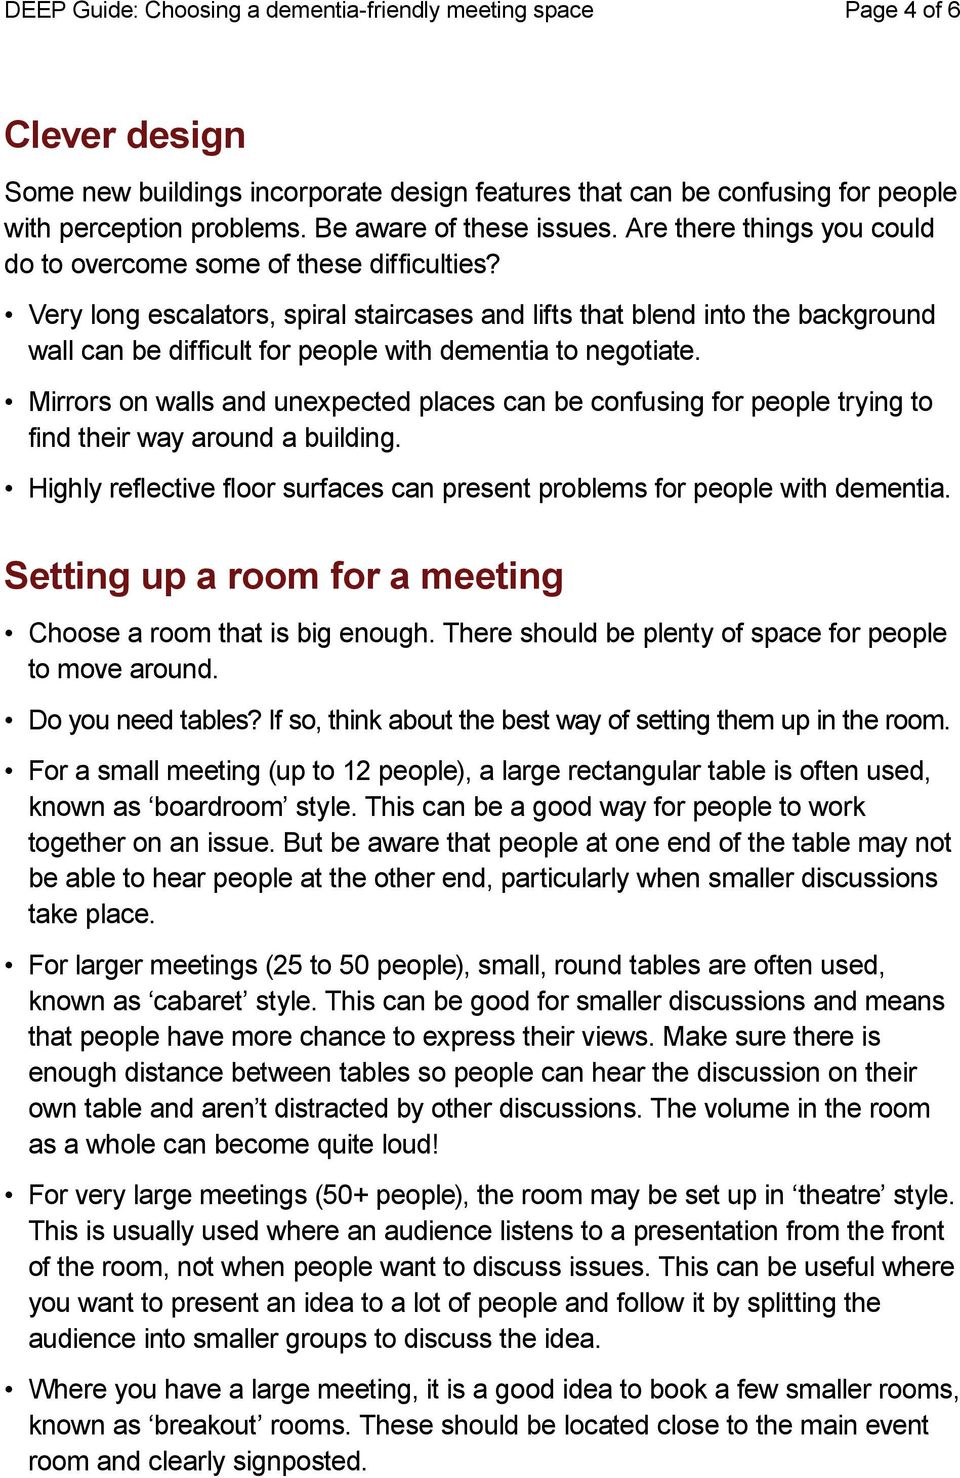 room for a meeting Choose a room that is big enough. There should be plenty of space for people to move around. Do you need tables? If so, think about the best way of setting them up in the room.